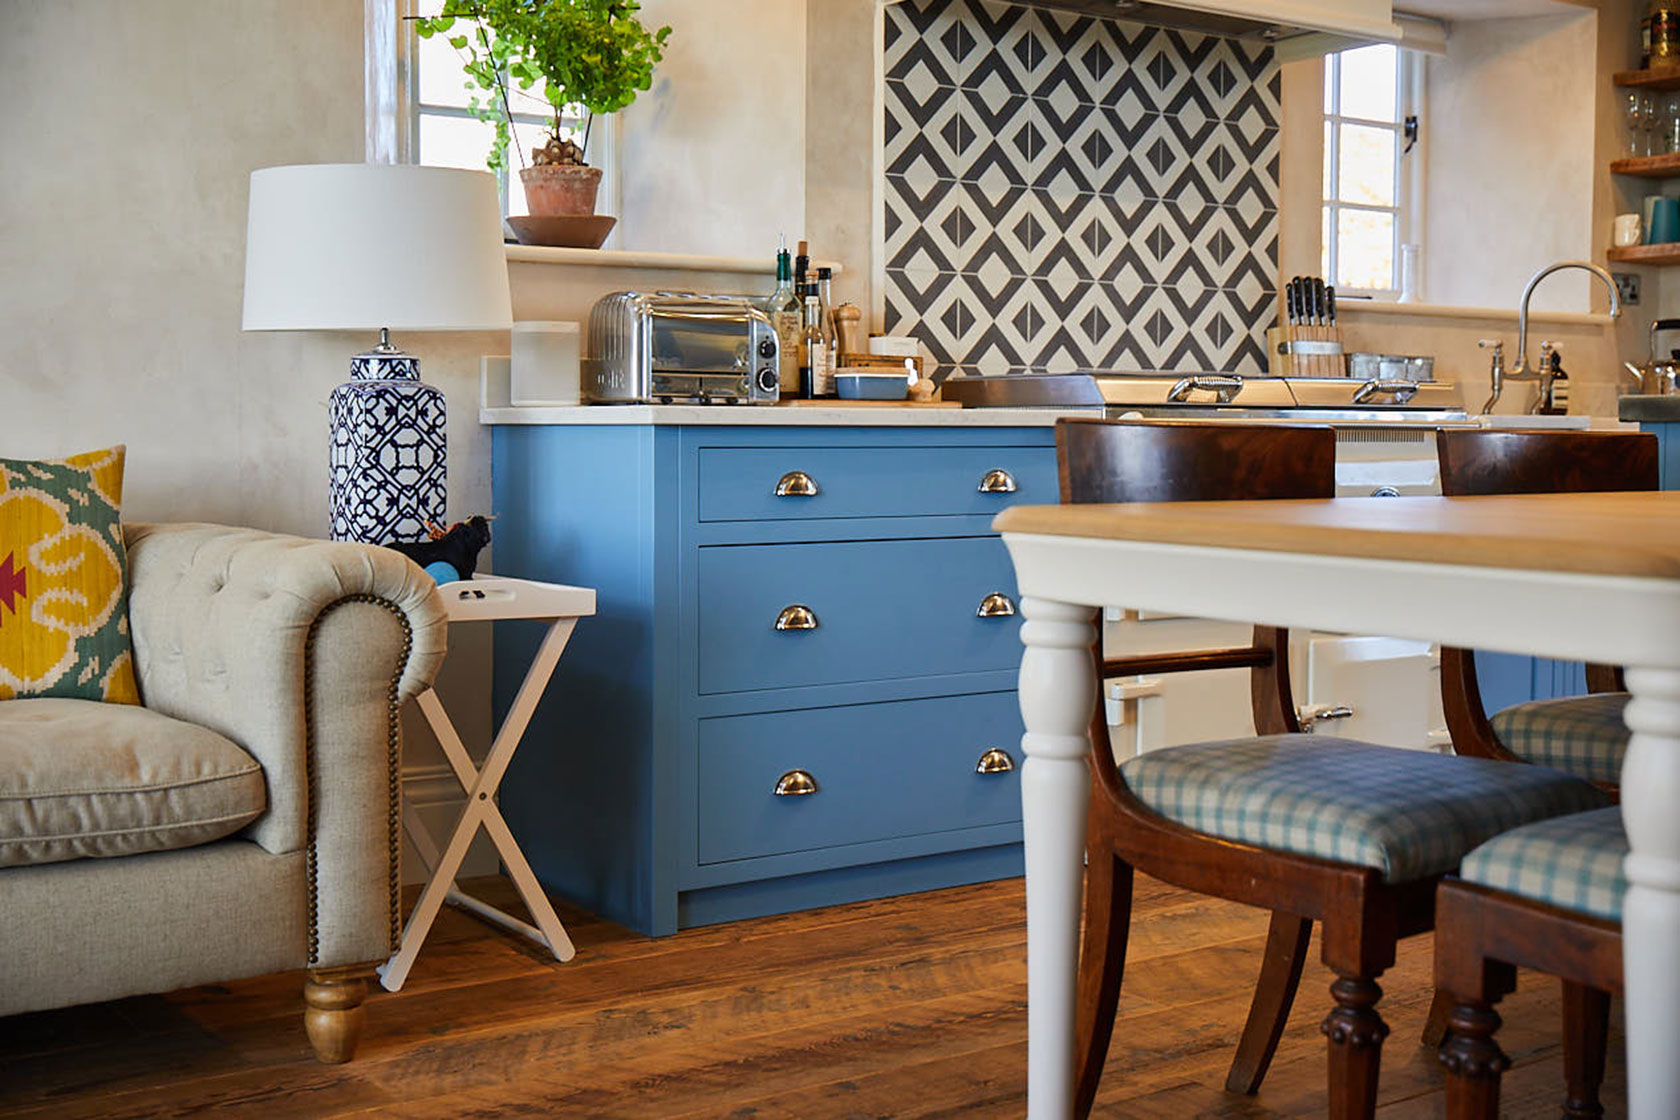 Light blue kitchen pan drawers with cream farmhouse table